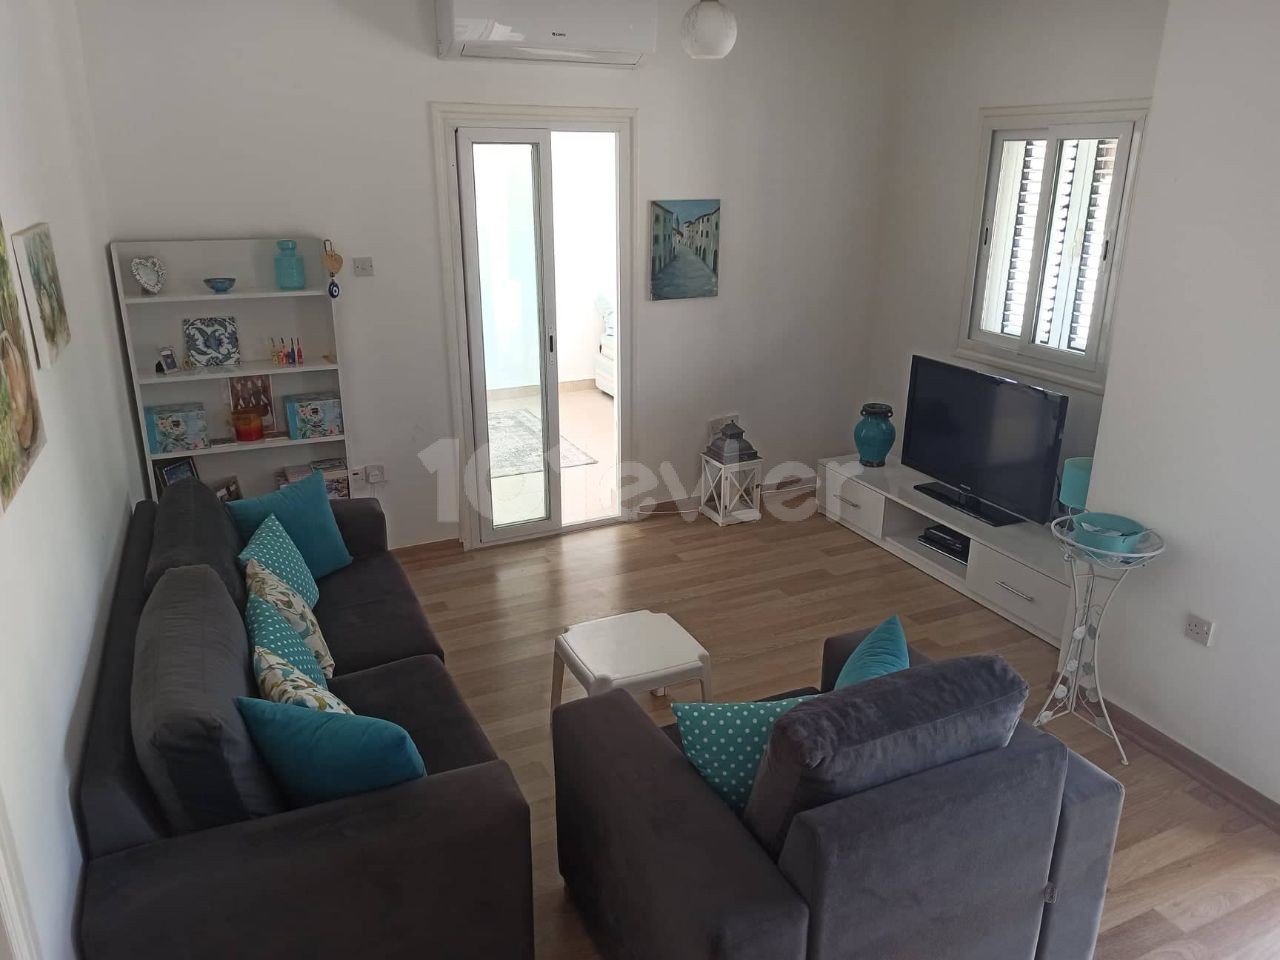 Attractive And Well Presented 3 Bedroom Villa In This Popular Cypriot Village of 'Catalkoy' - Close To All Local Services 